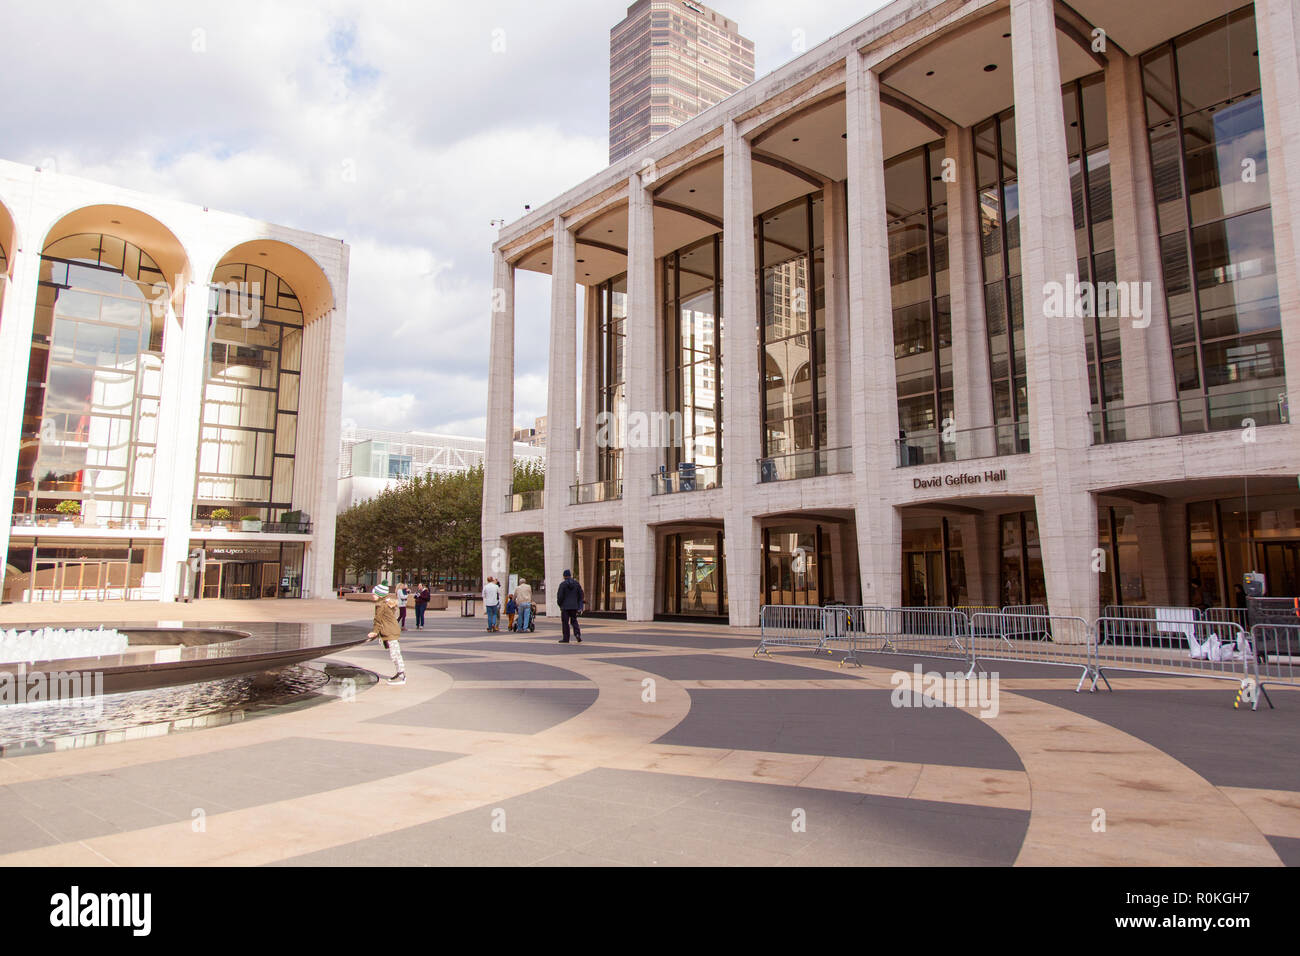 Le Lincoln Center Performing Arts Center, Broadway, New York, United States of America.USA Banque D'Images